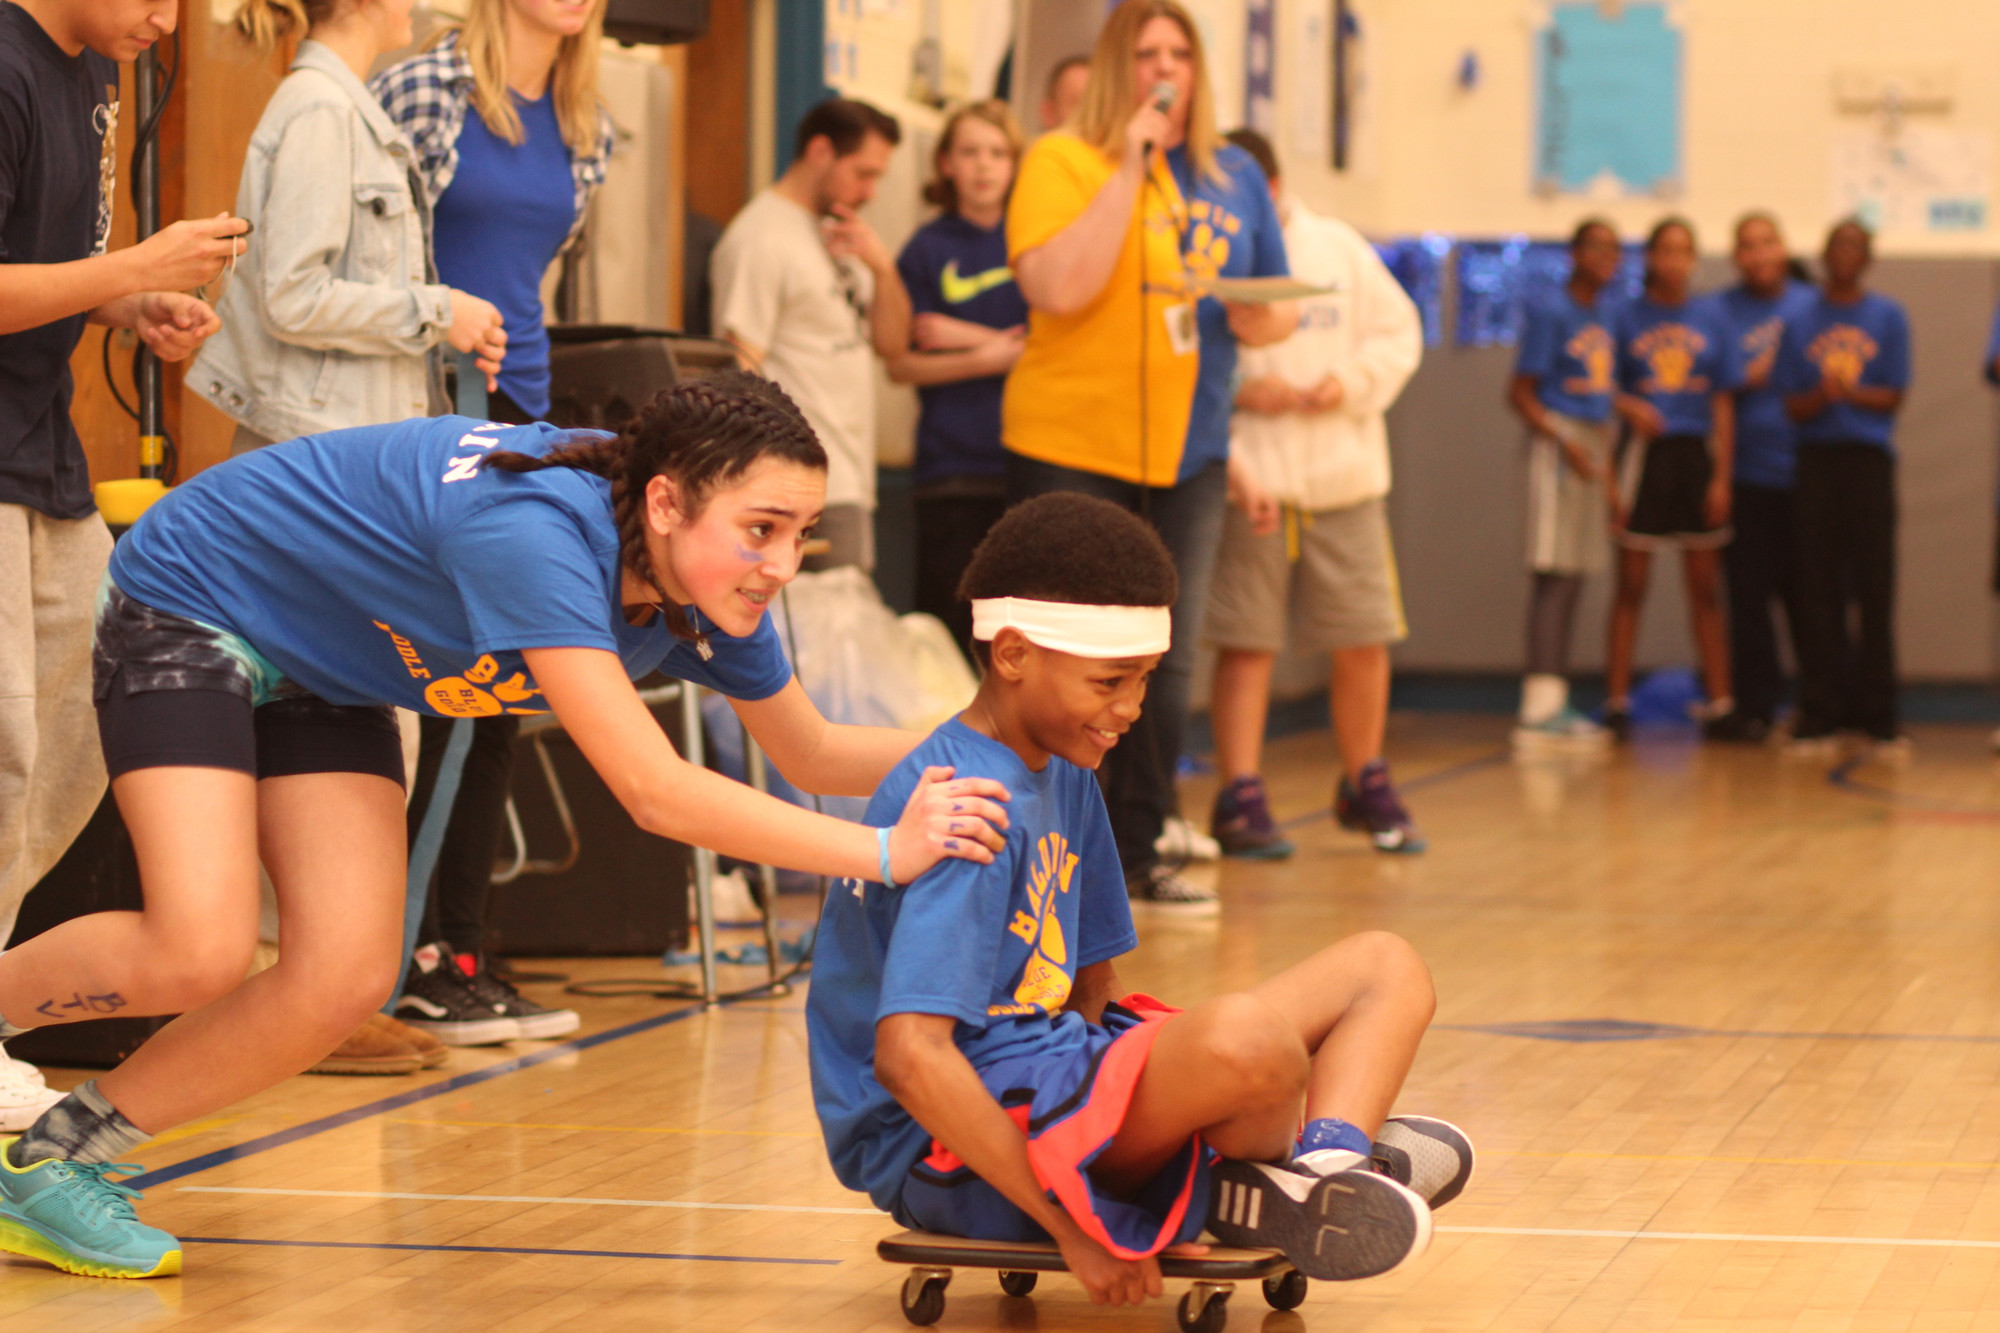 Blue Team captains Nicolette Manzella and Rhyjon Blackwell took a wide turn in the scooter relay.